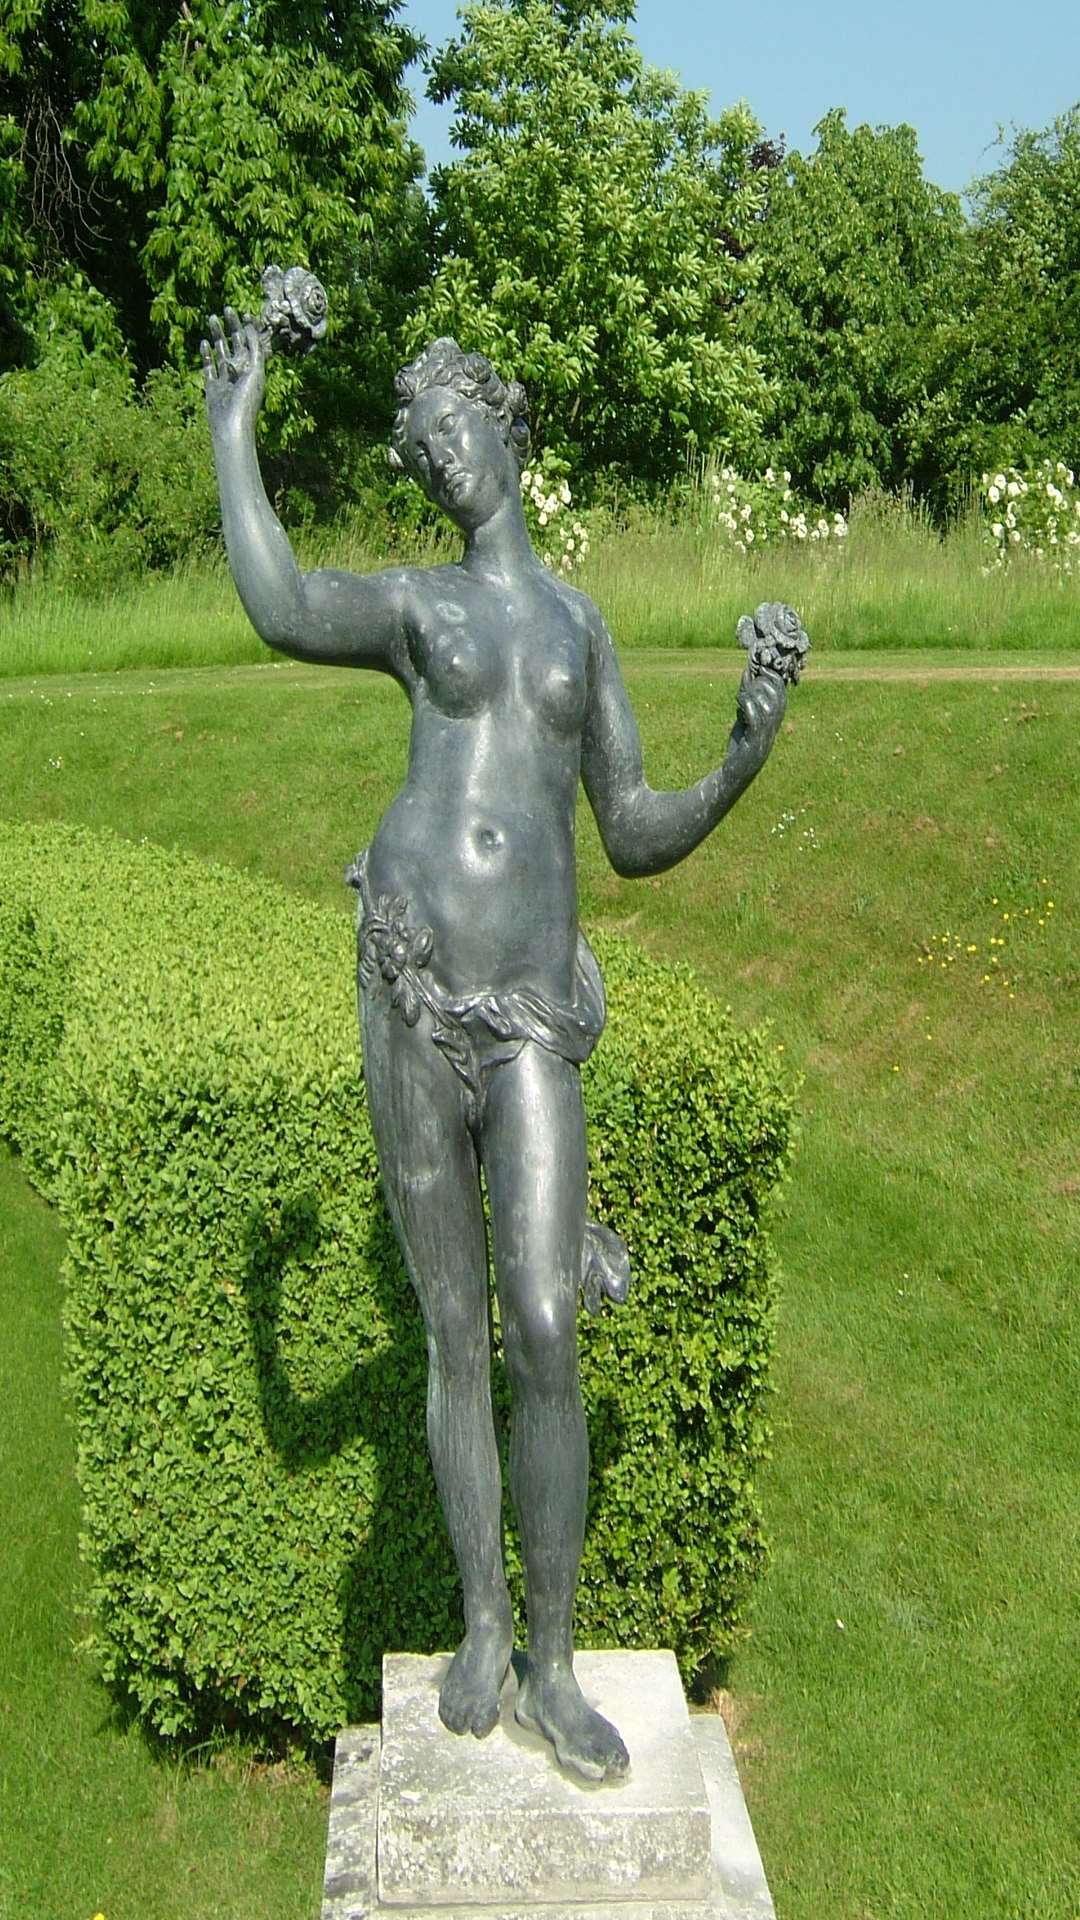 One of the statues stolen from Godinton